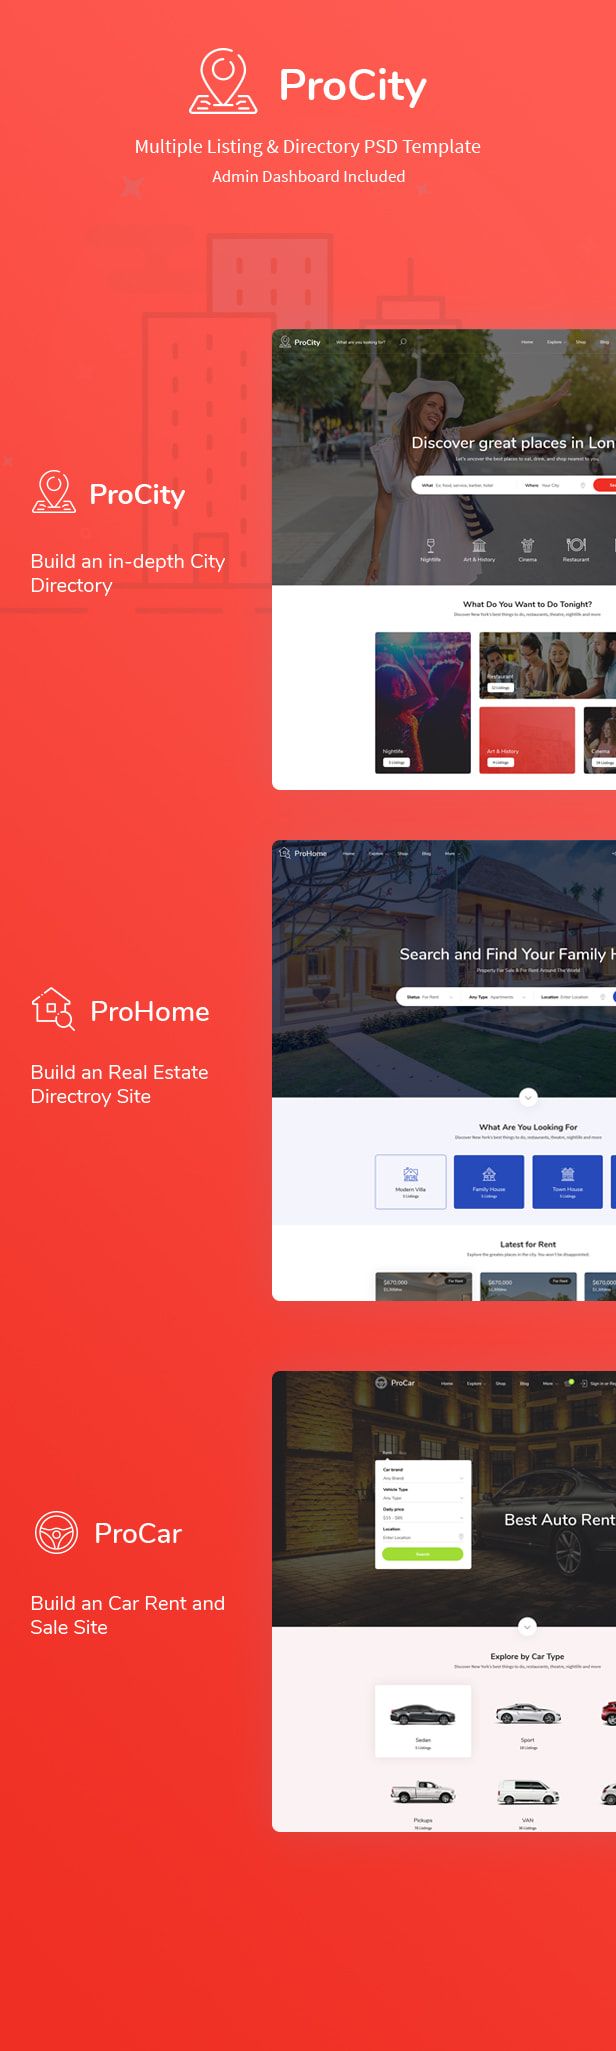 Procity - Multiple Listing & Directory PSD Template - 1